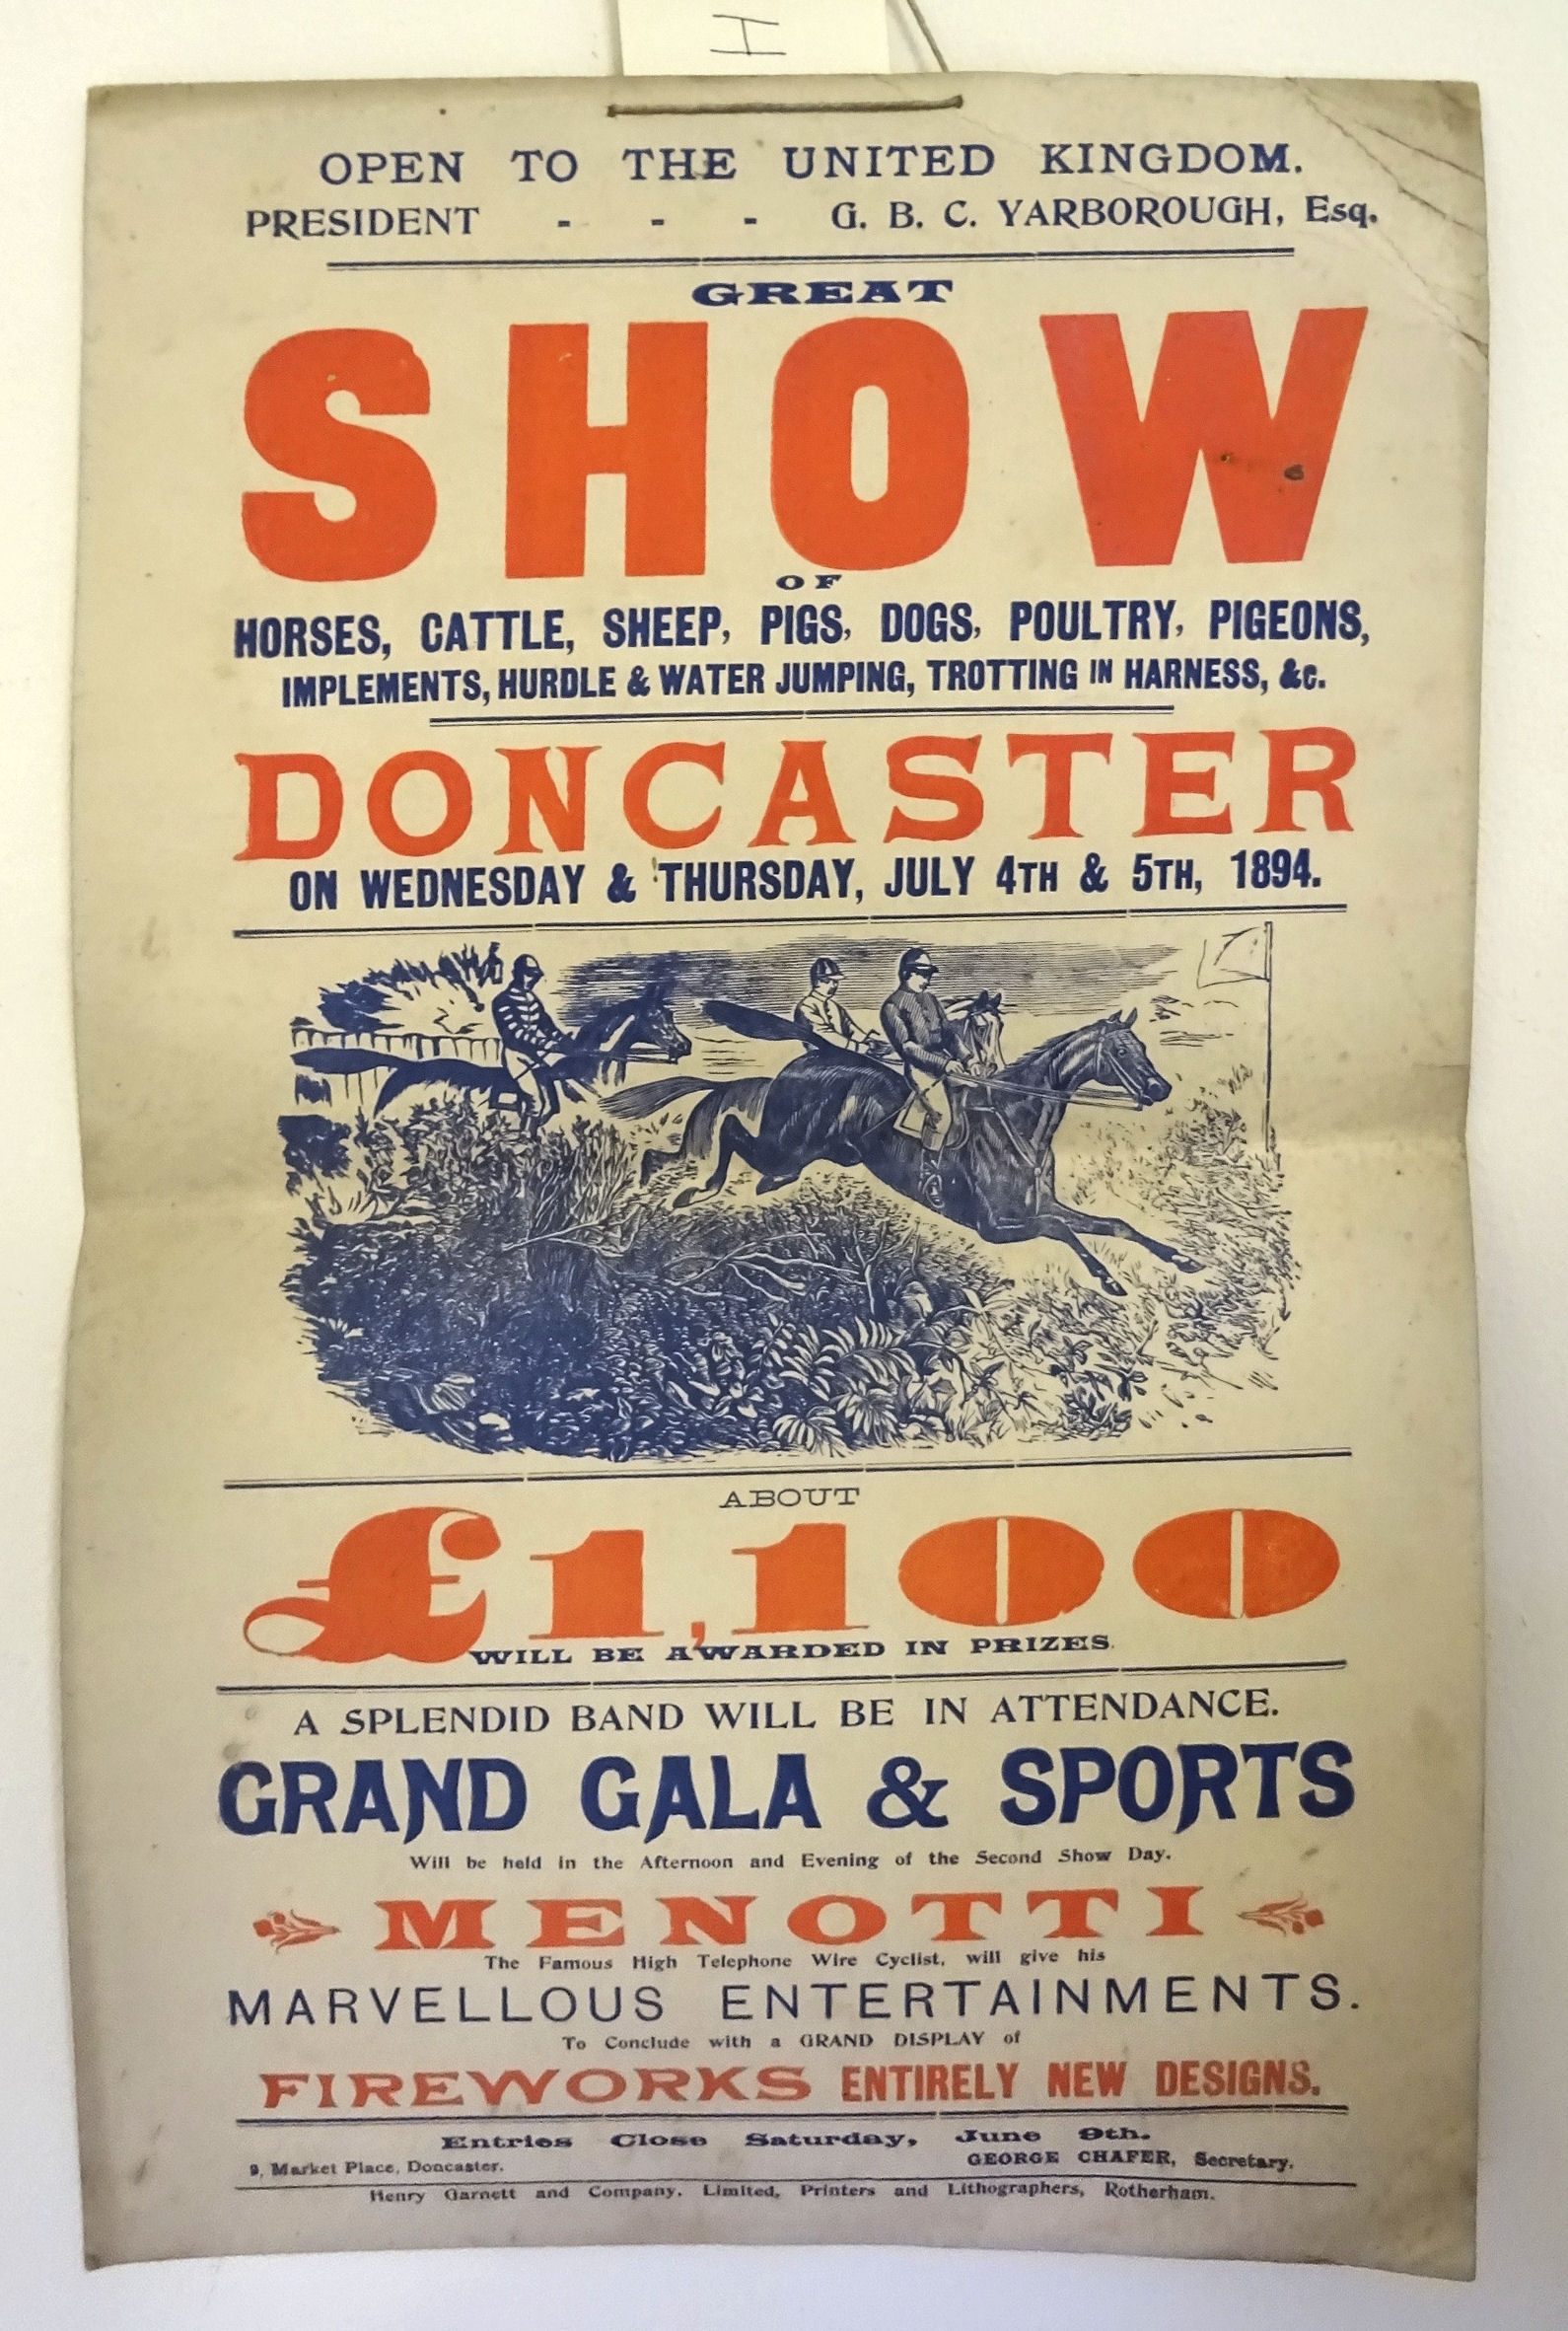 A poster for the Great Show at Doncaster, July 1894 printed in colours by Henry Garnett & Company.